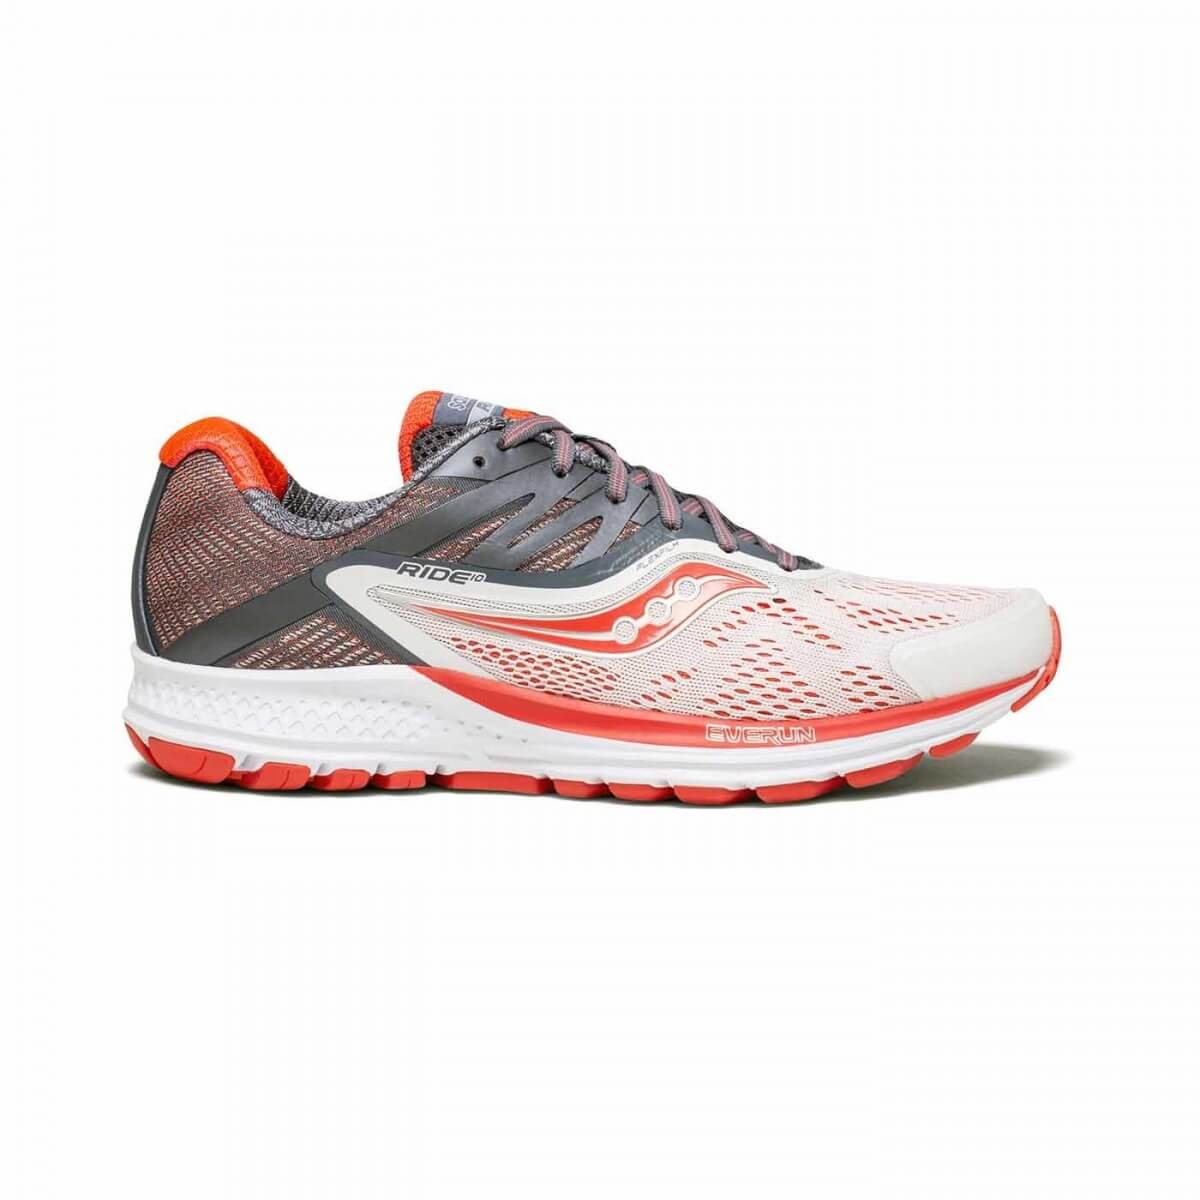 saucony guide mujer blanco